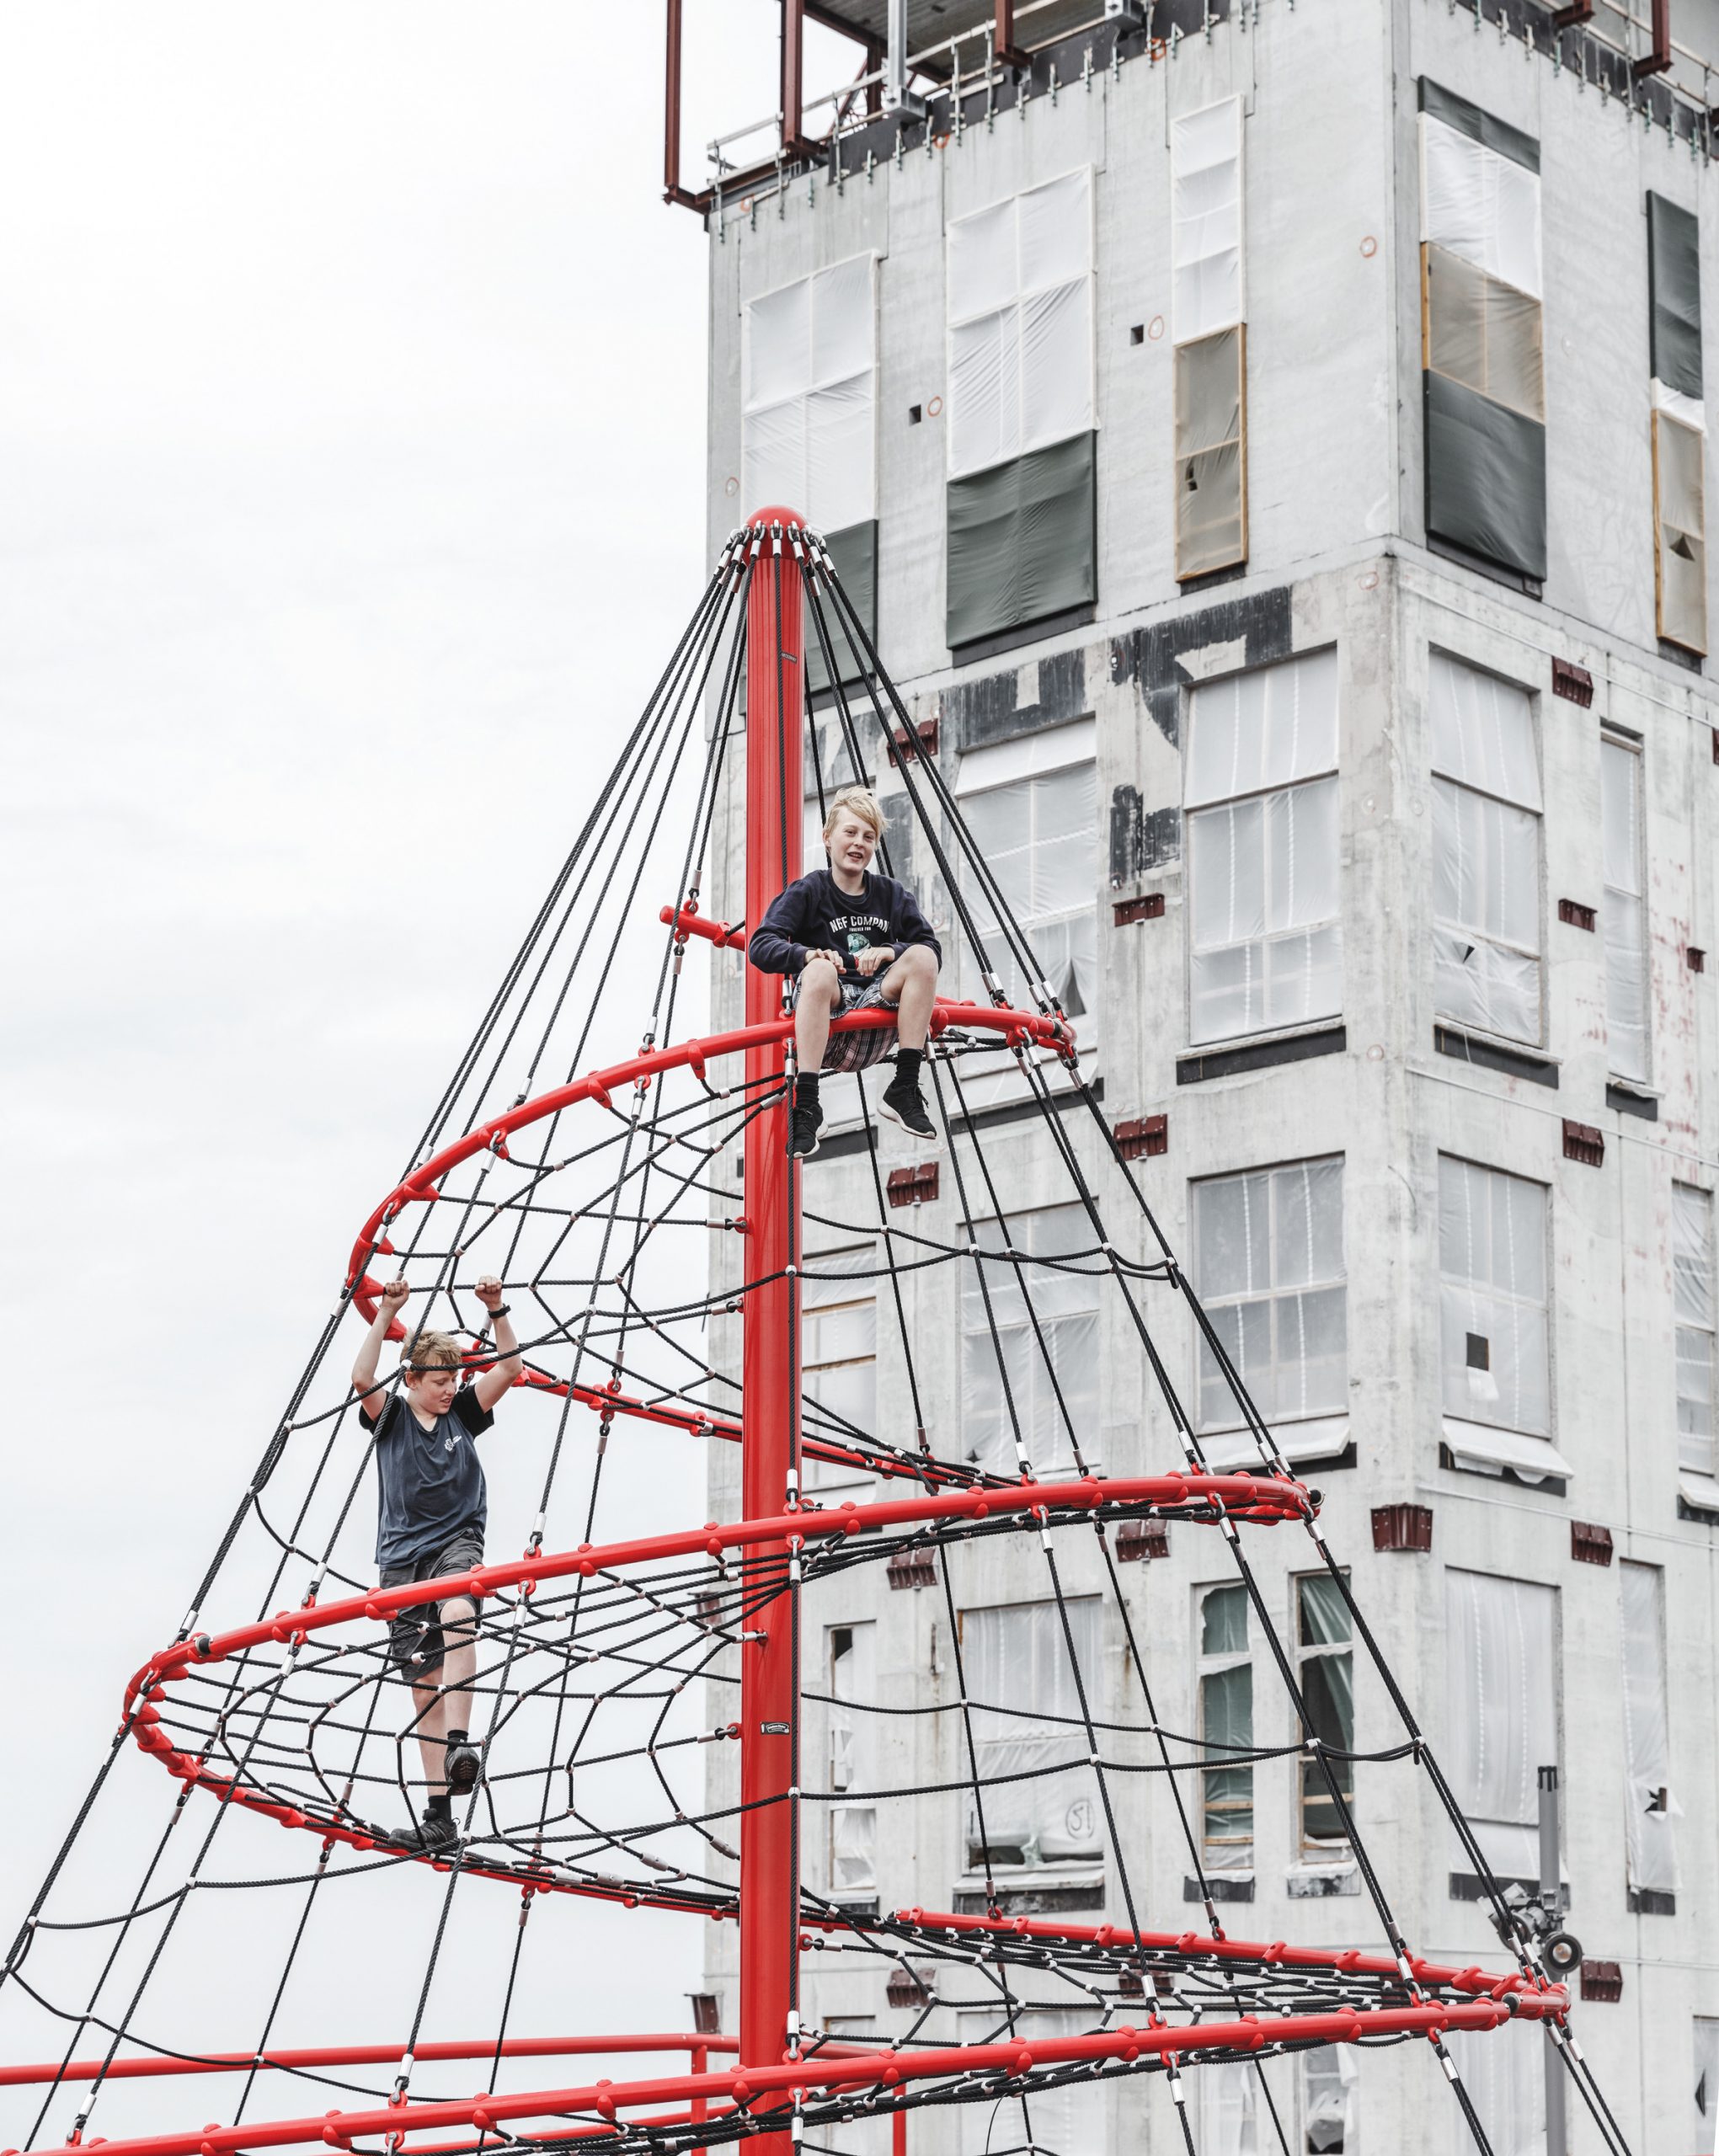 Children on helical pyramid climber on rooftop playground